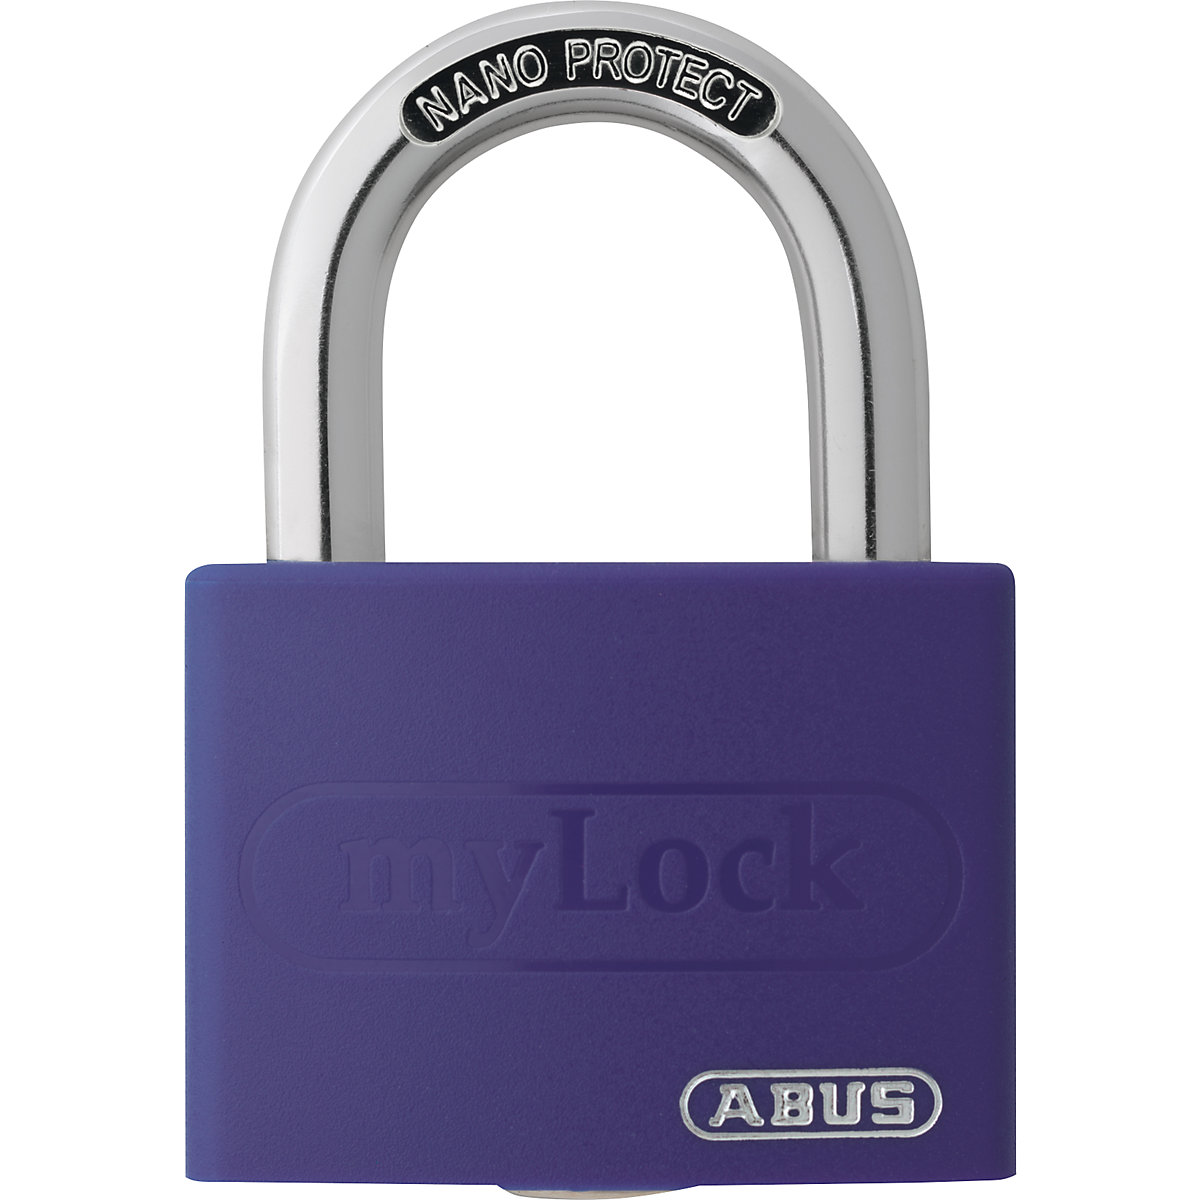 Padlock, can be written on – ABUS